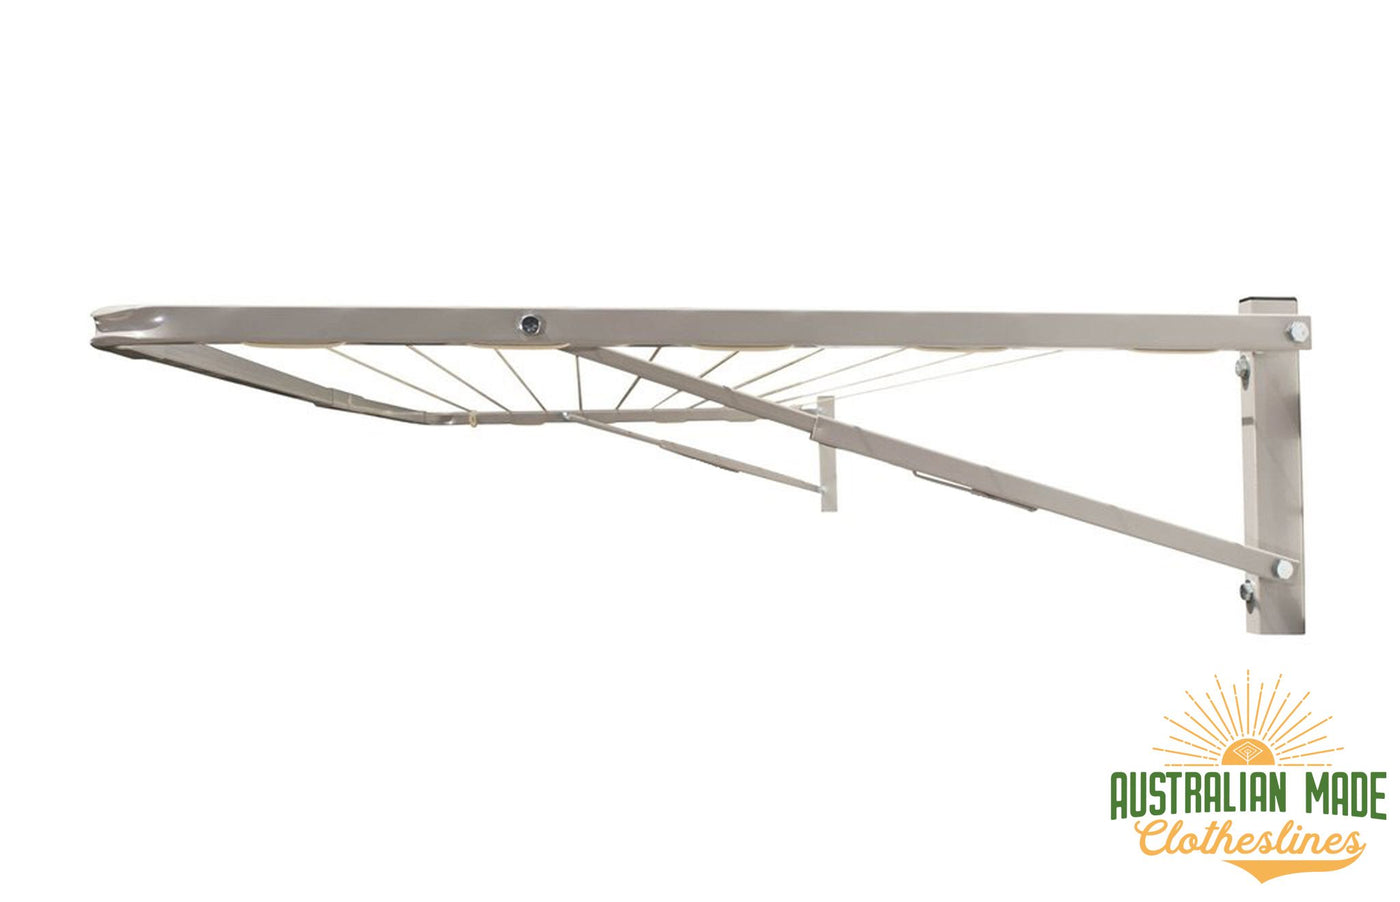 Eco 240 Clothesline - Surfmist Right Side View - Australian Made Clotheslines